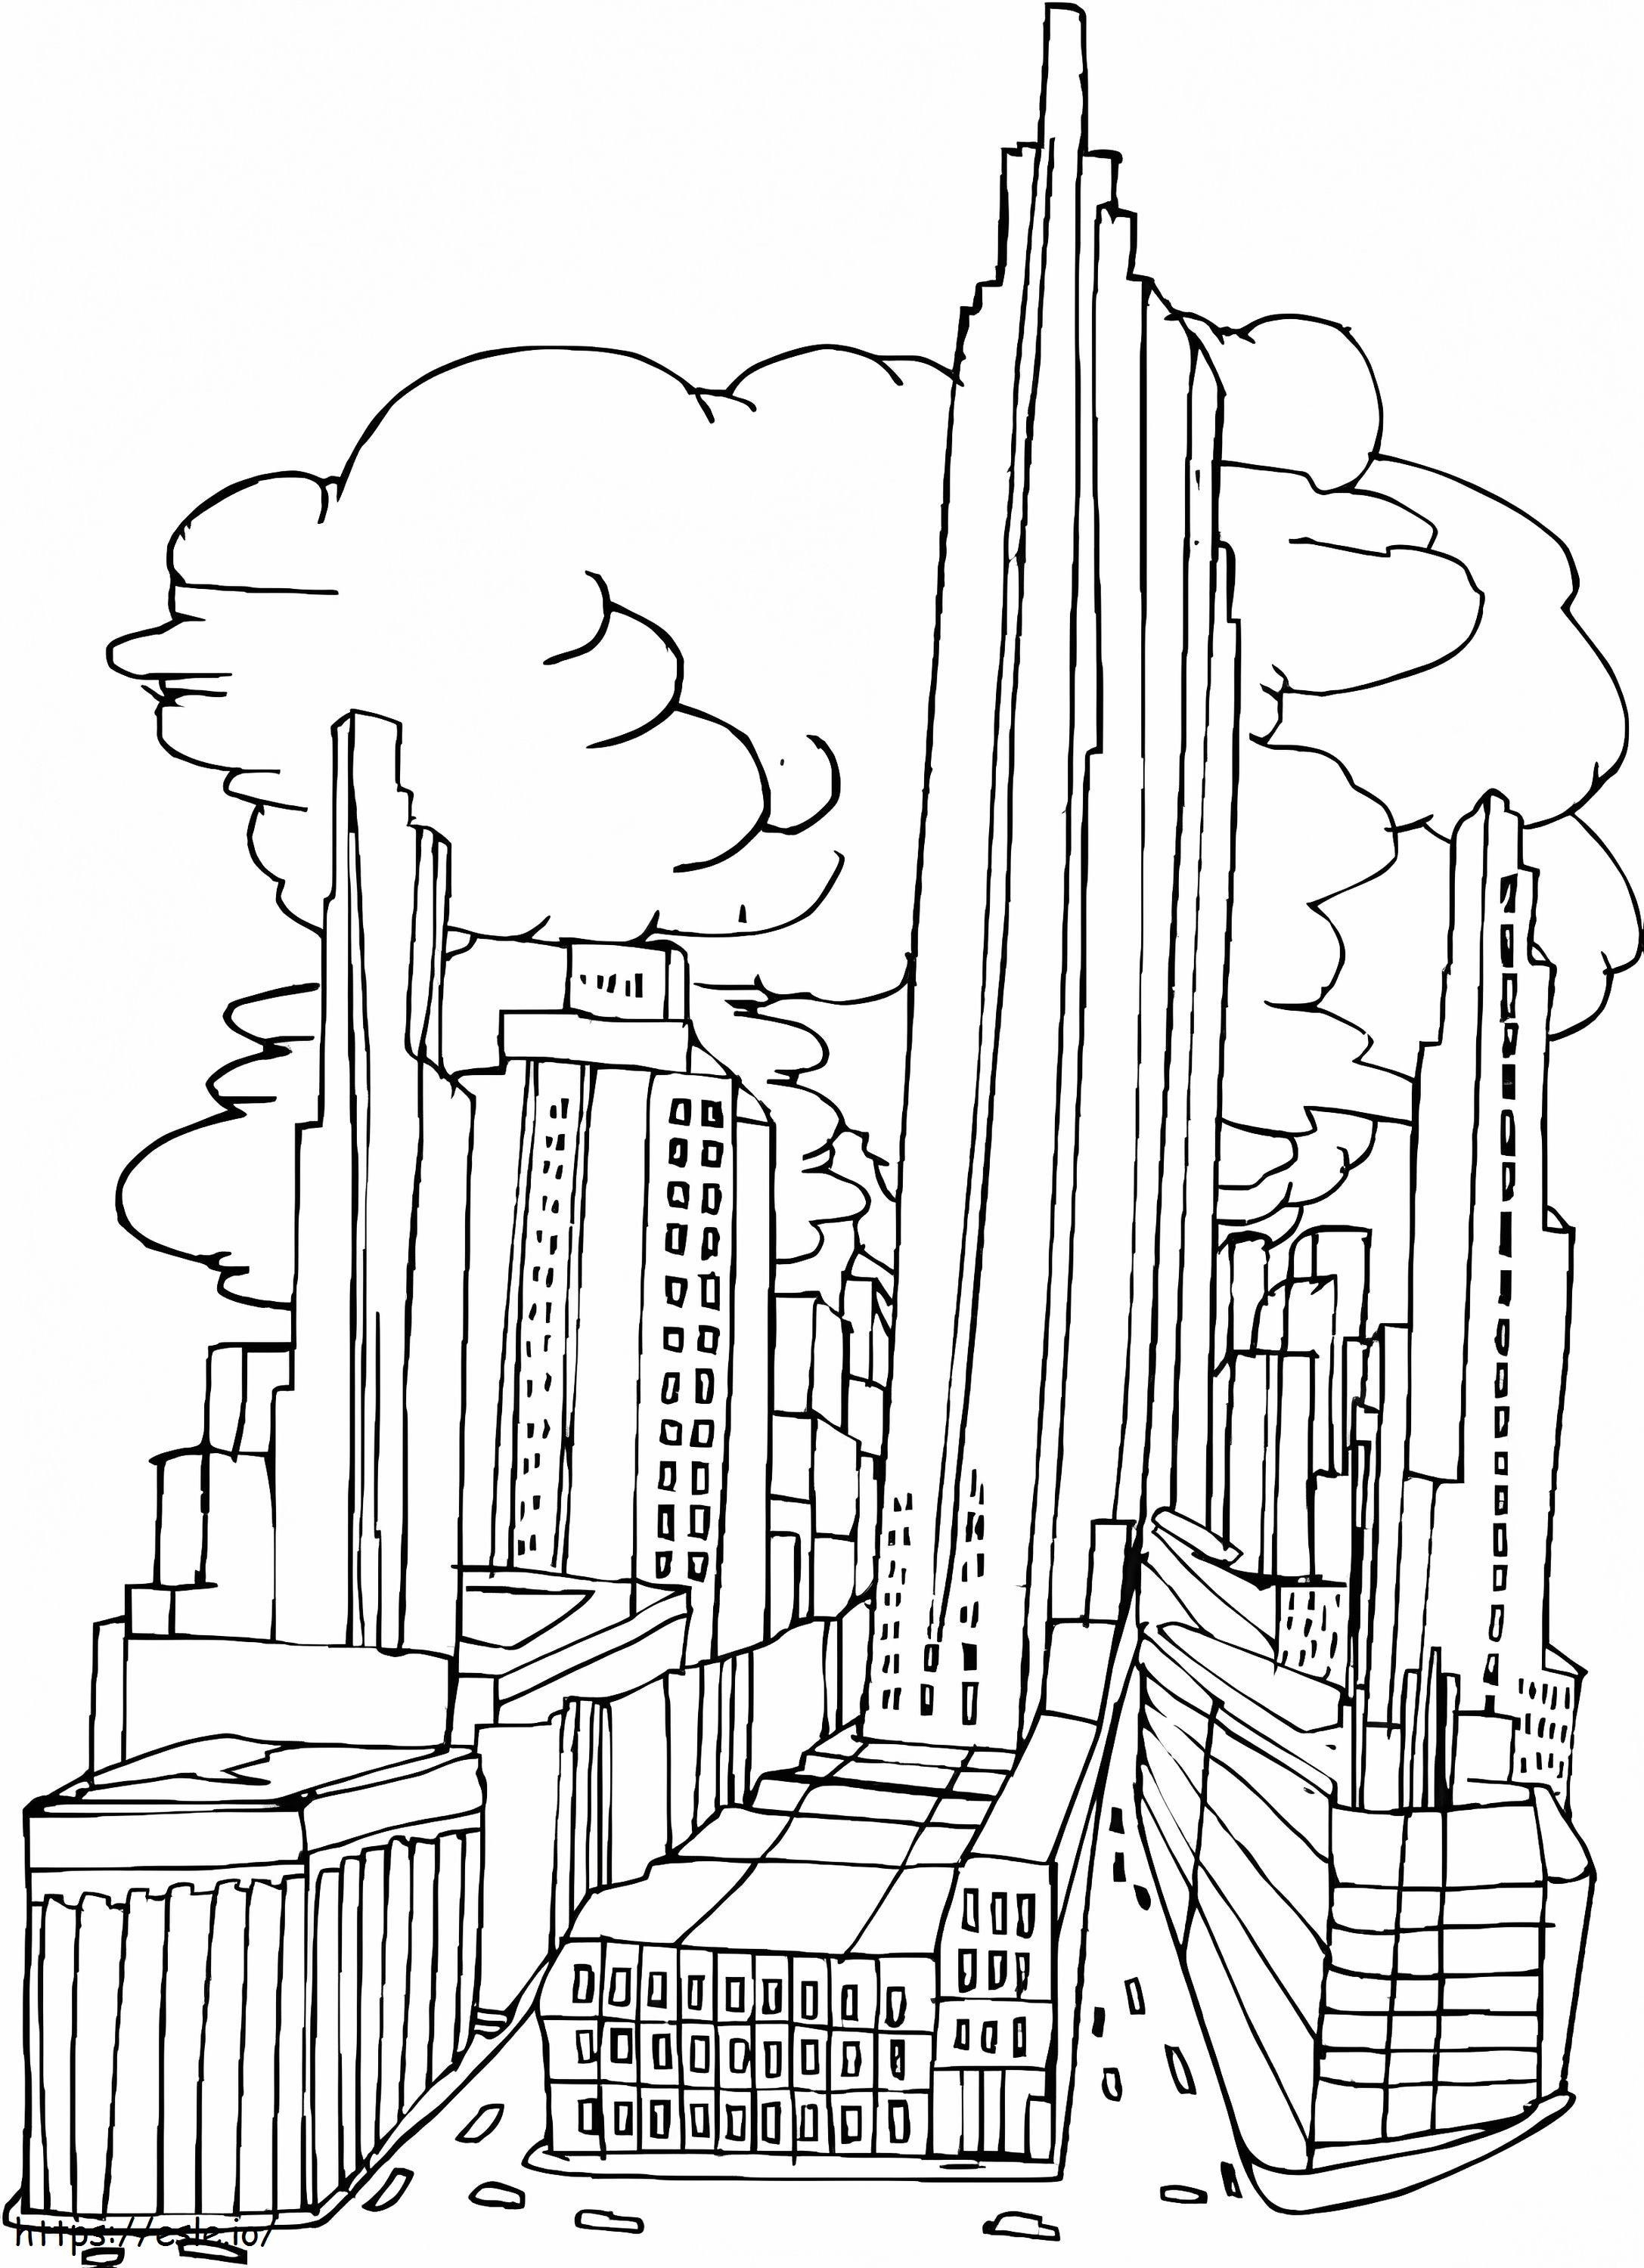 Tall City Buildings coloring page